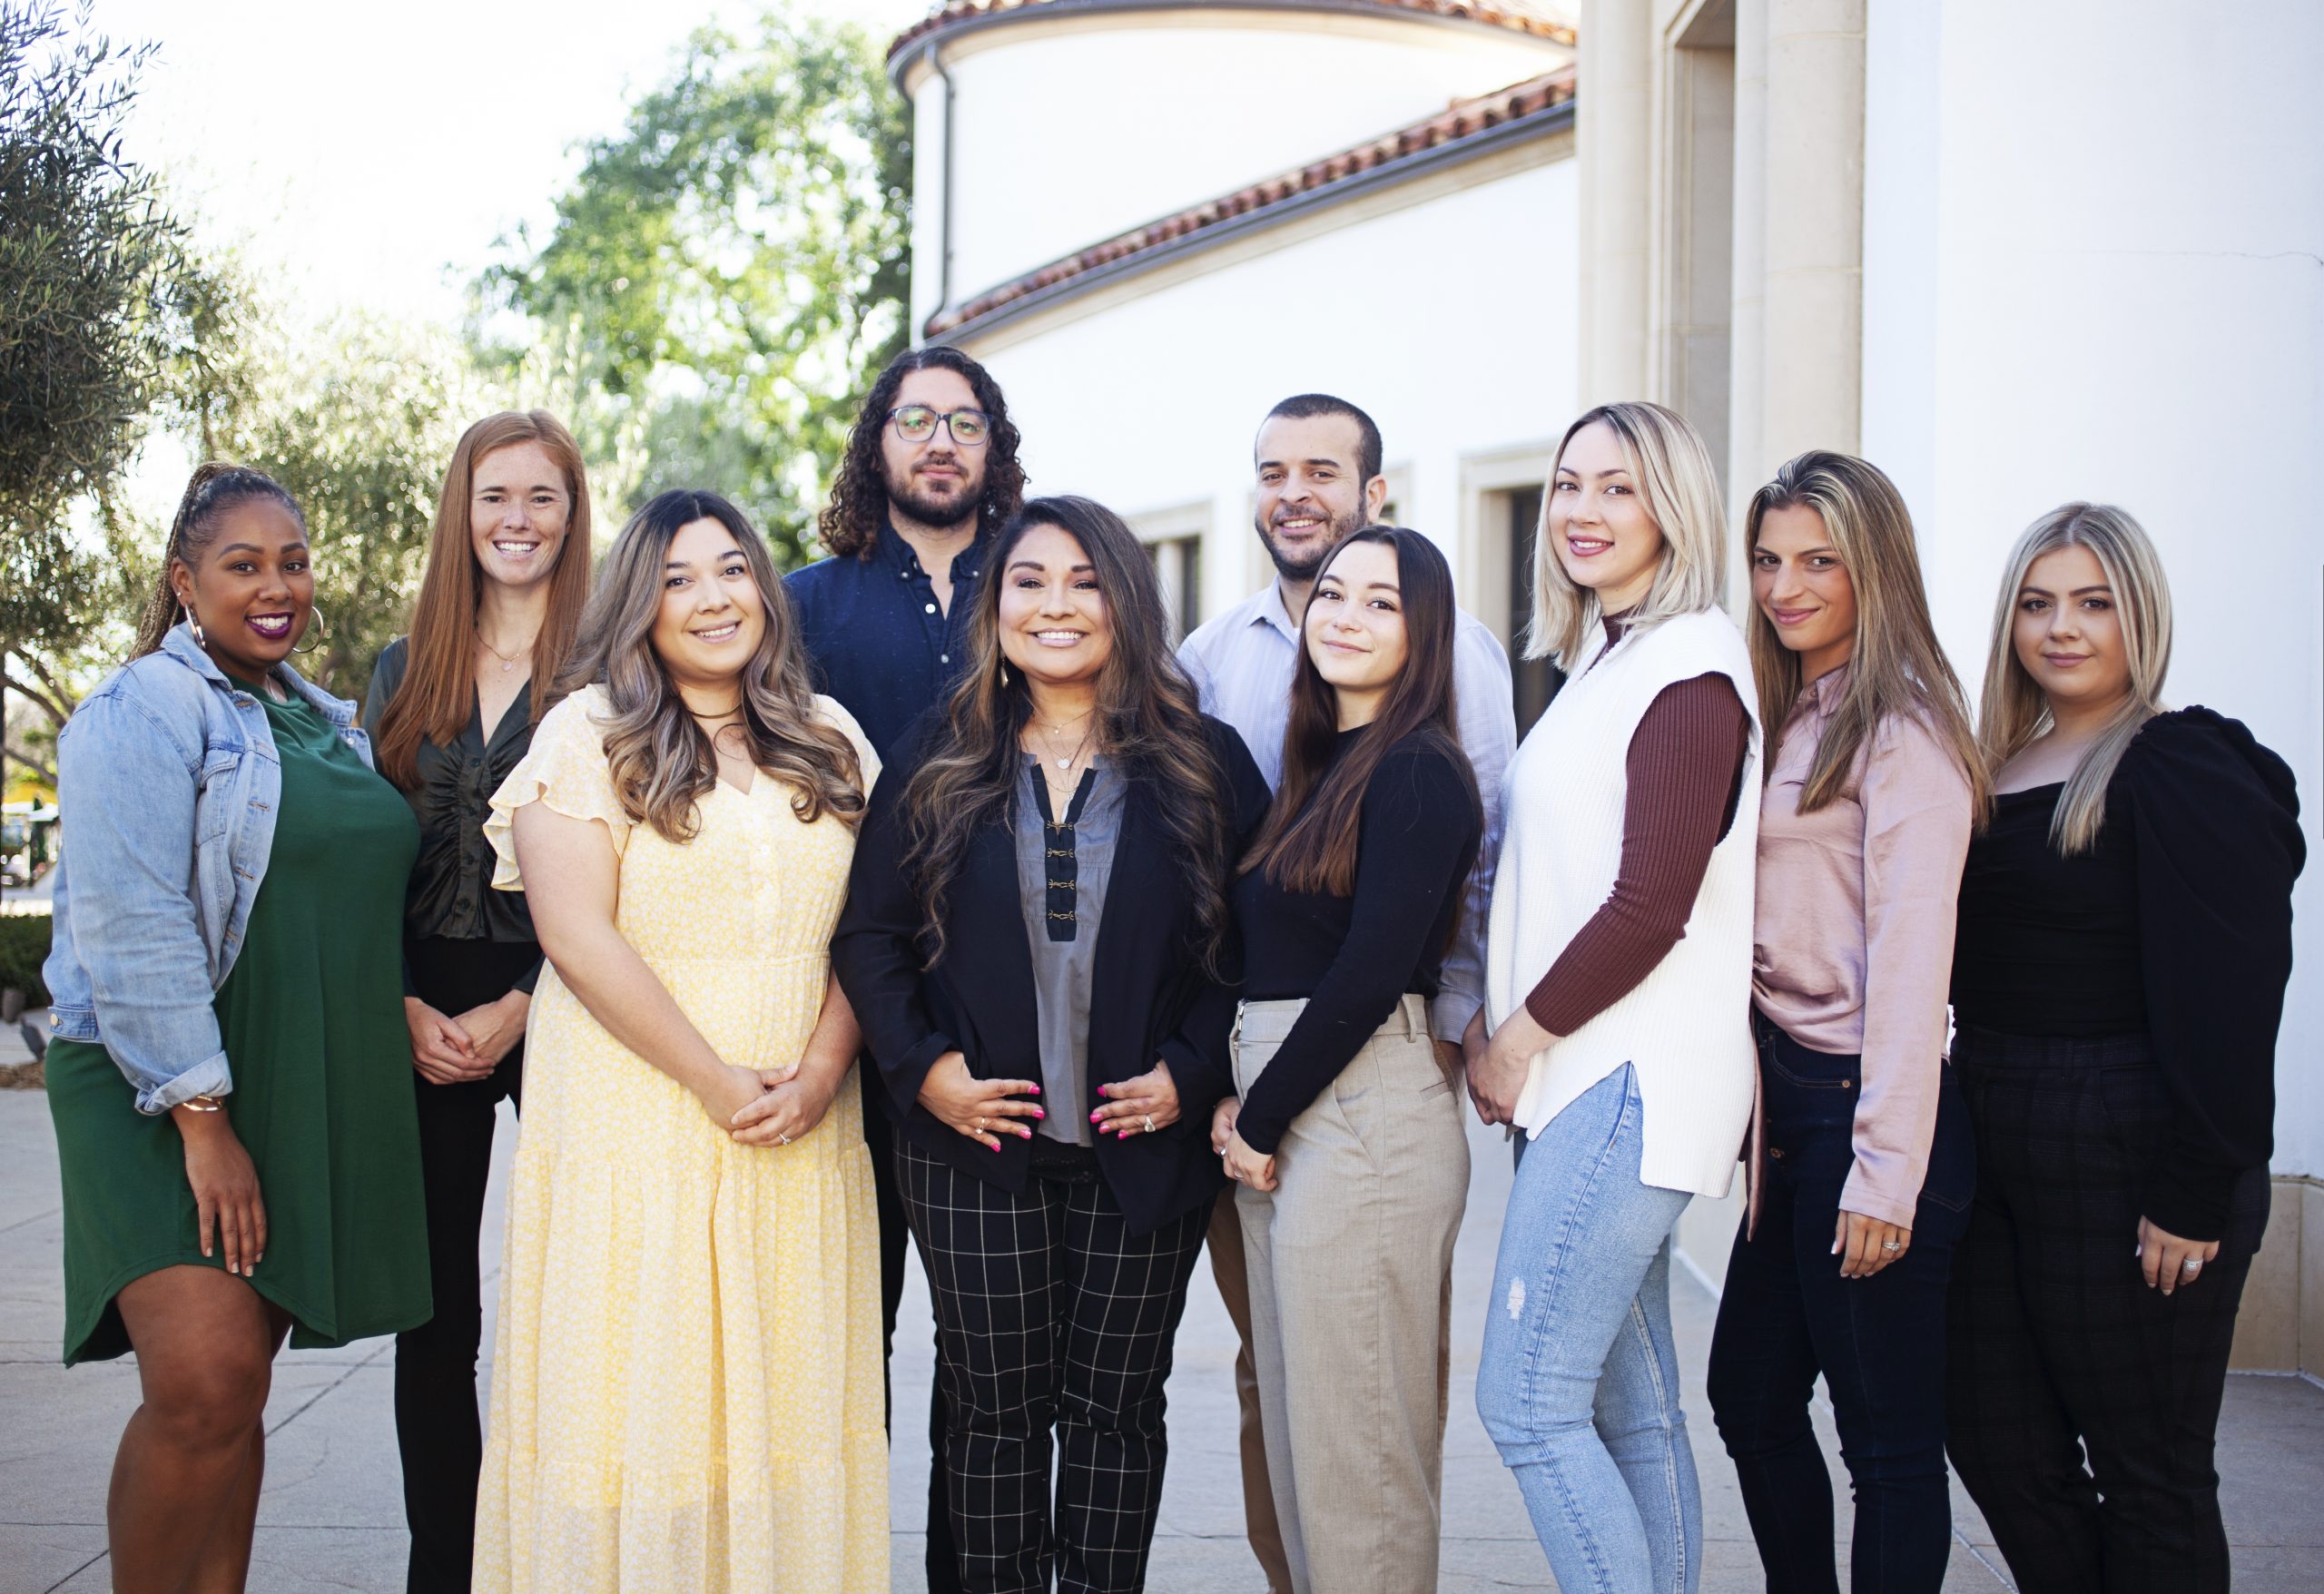 Simi Psychological Group team offering online counseling in Ventura County and the LA area